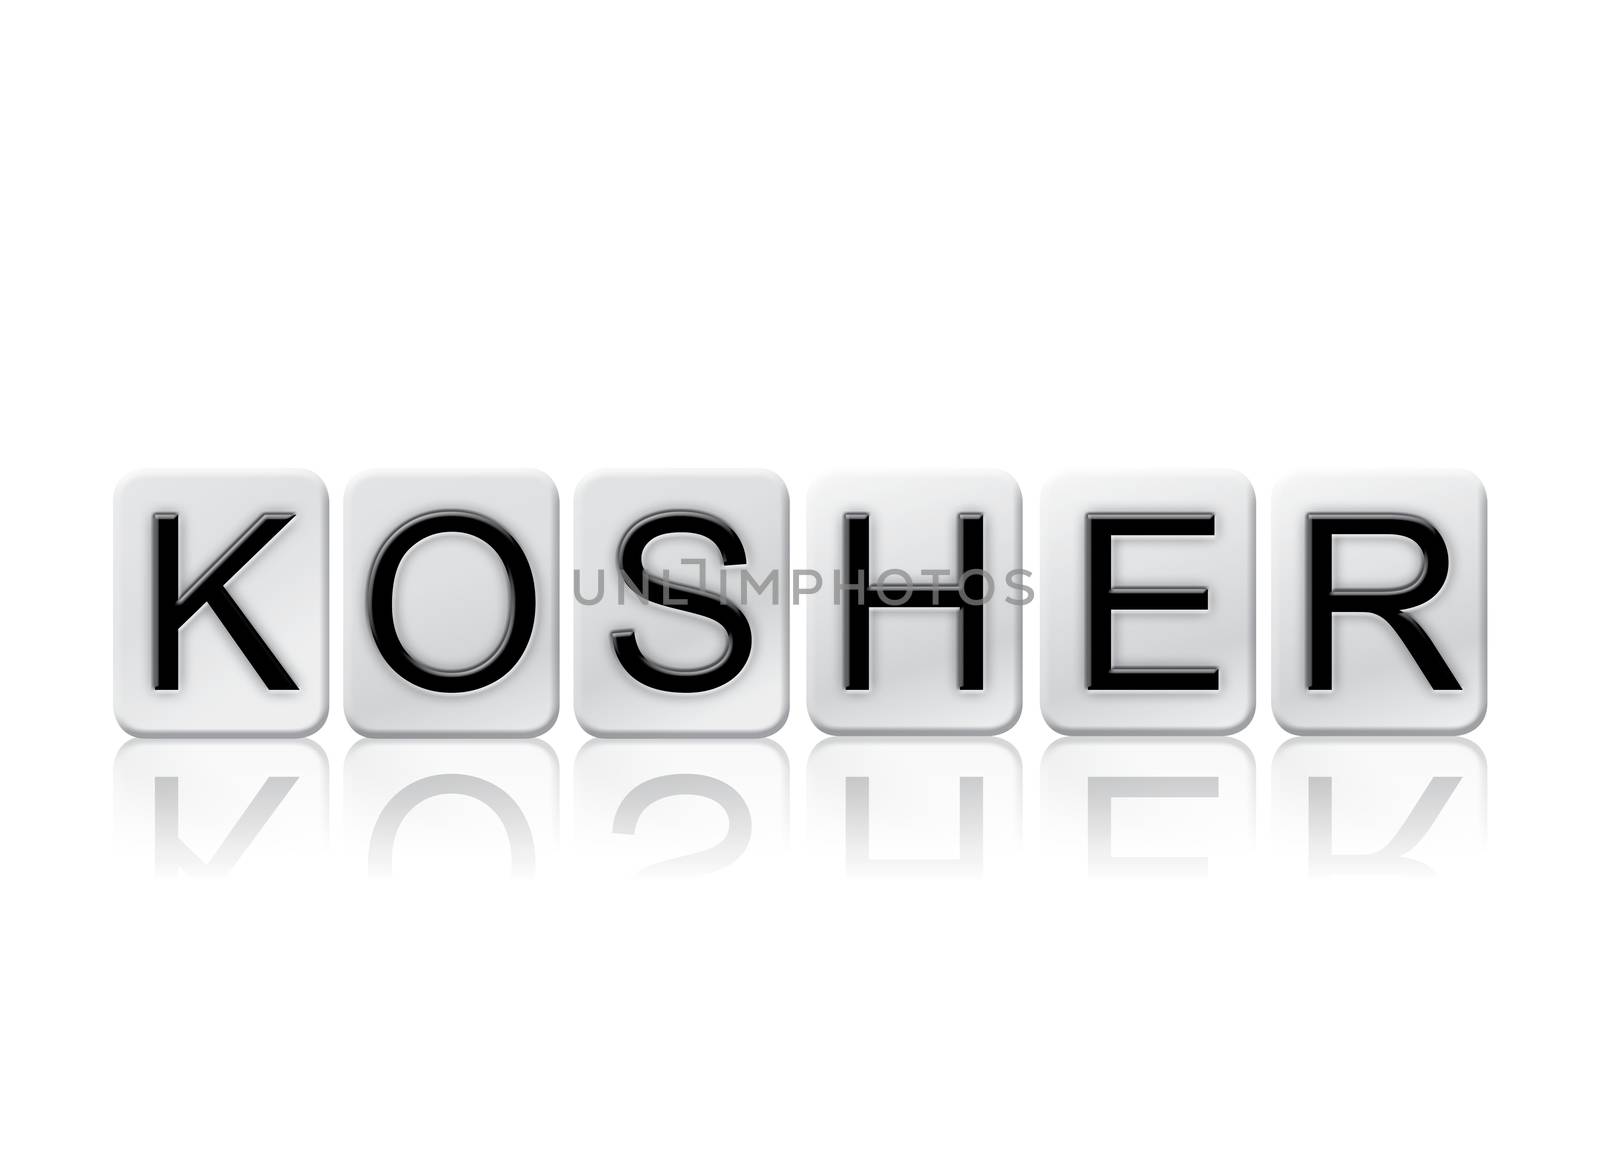 The word "Kosher" written in tile letters isolated on a white background.